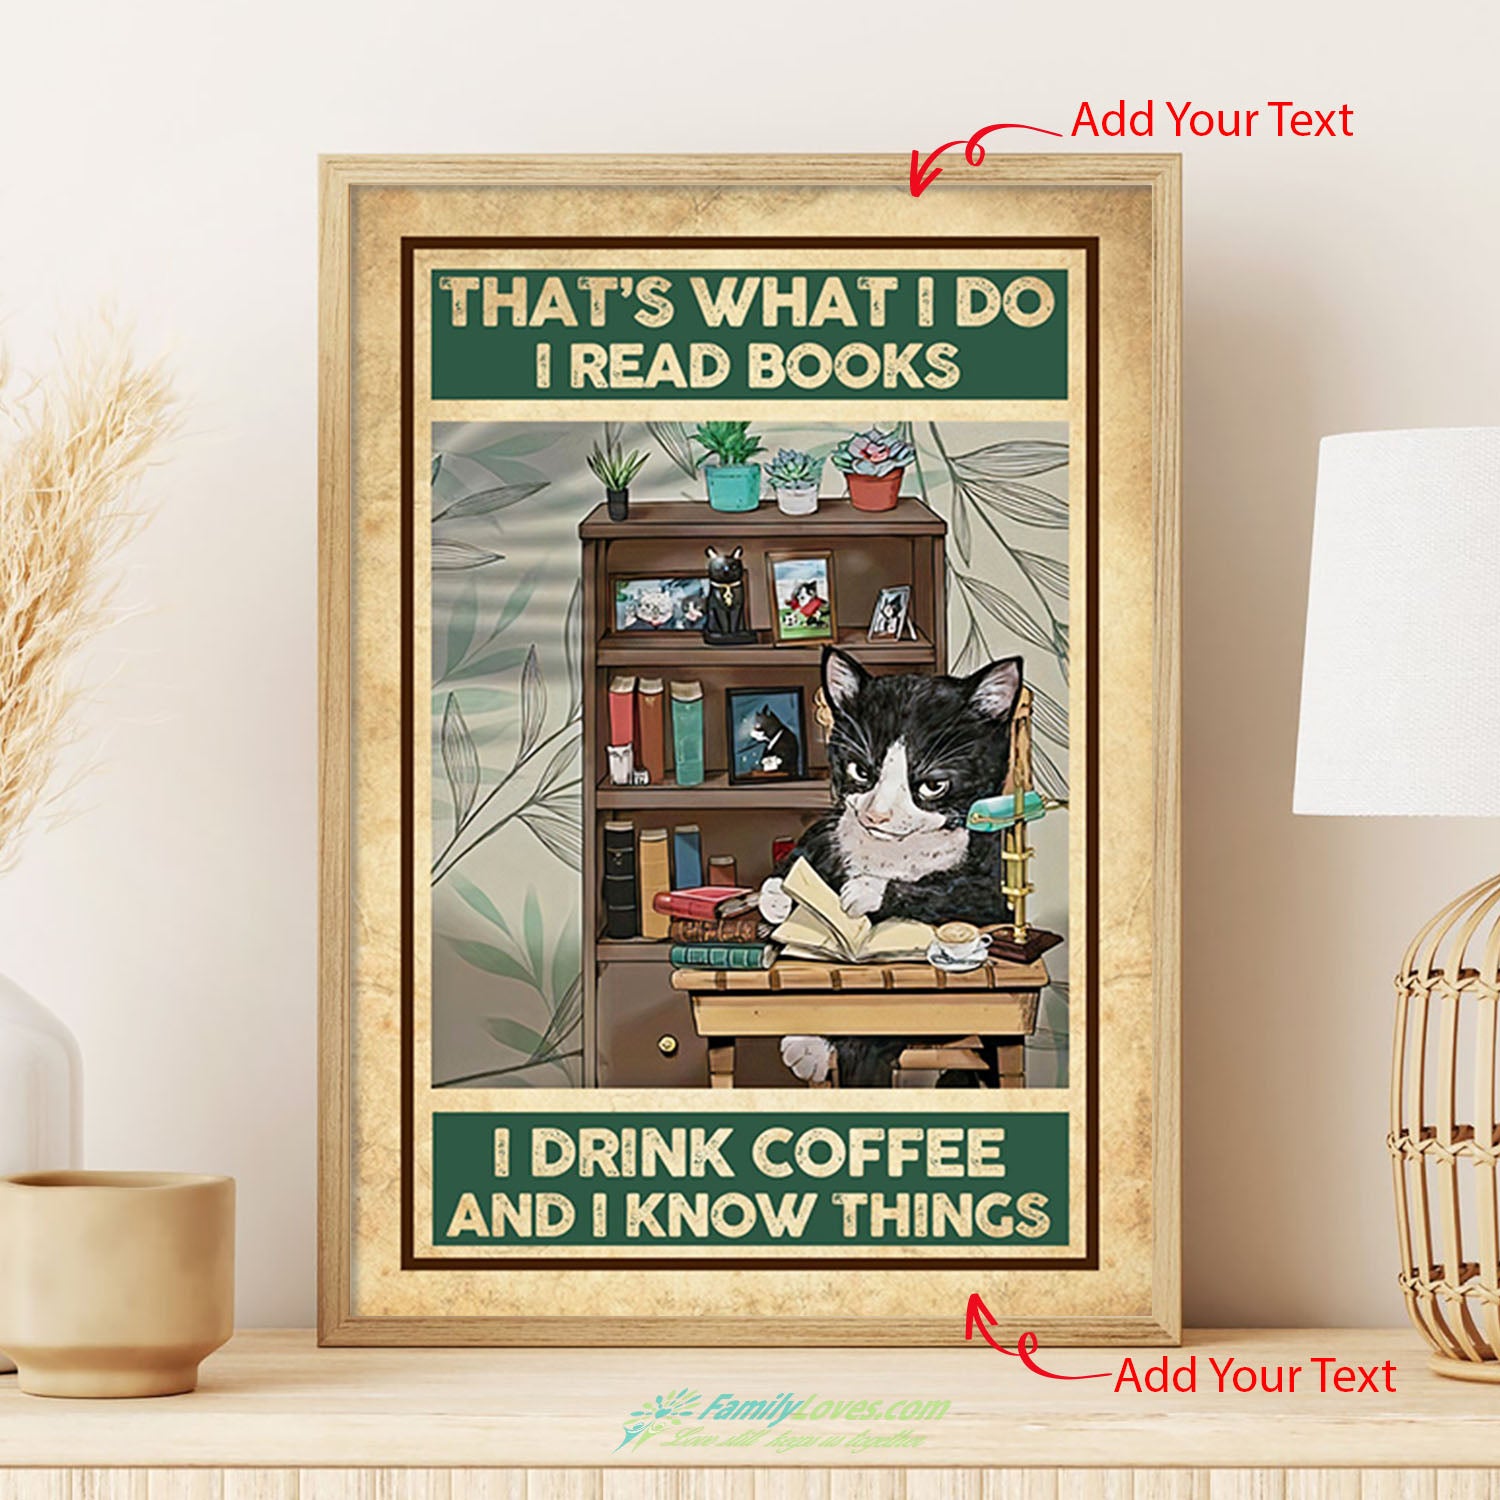 Thats What I Do I Drink Coffee And I Know Things Plastic Canvas Kit Poster 12X16 All Size 1